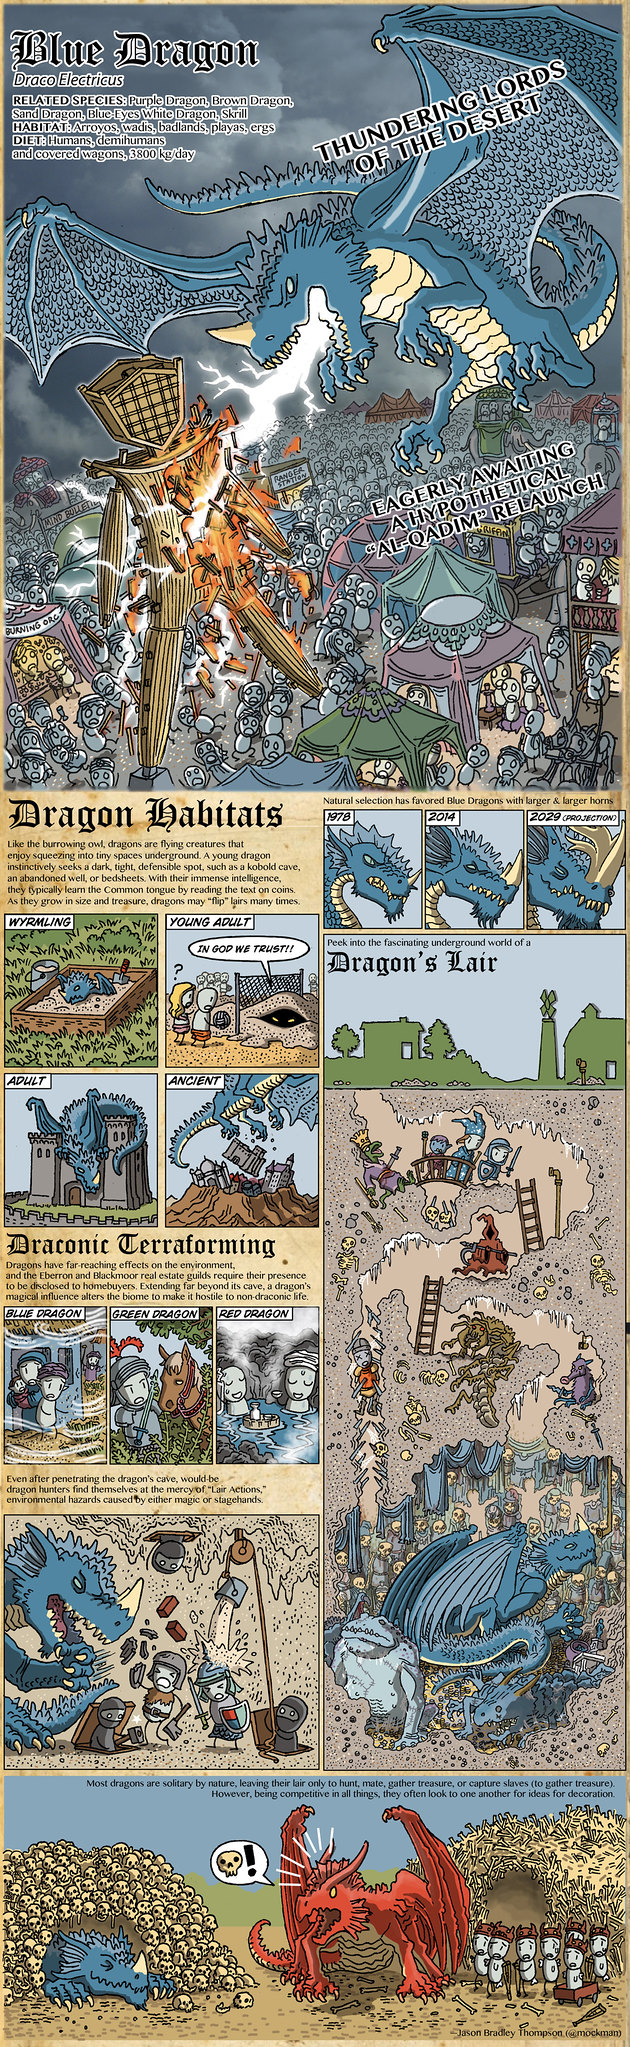 The Dragons of Dungeons & Dragons by Jason Thompson - Blue Dragon